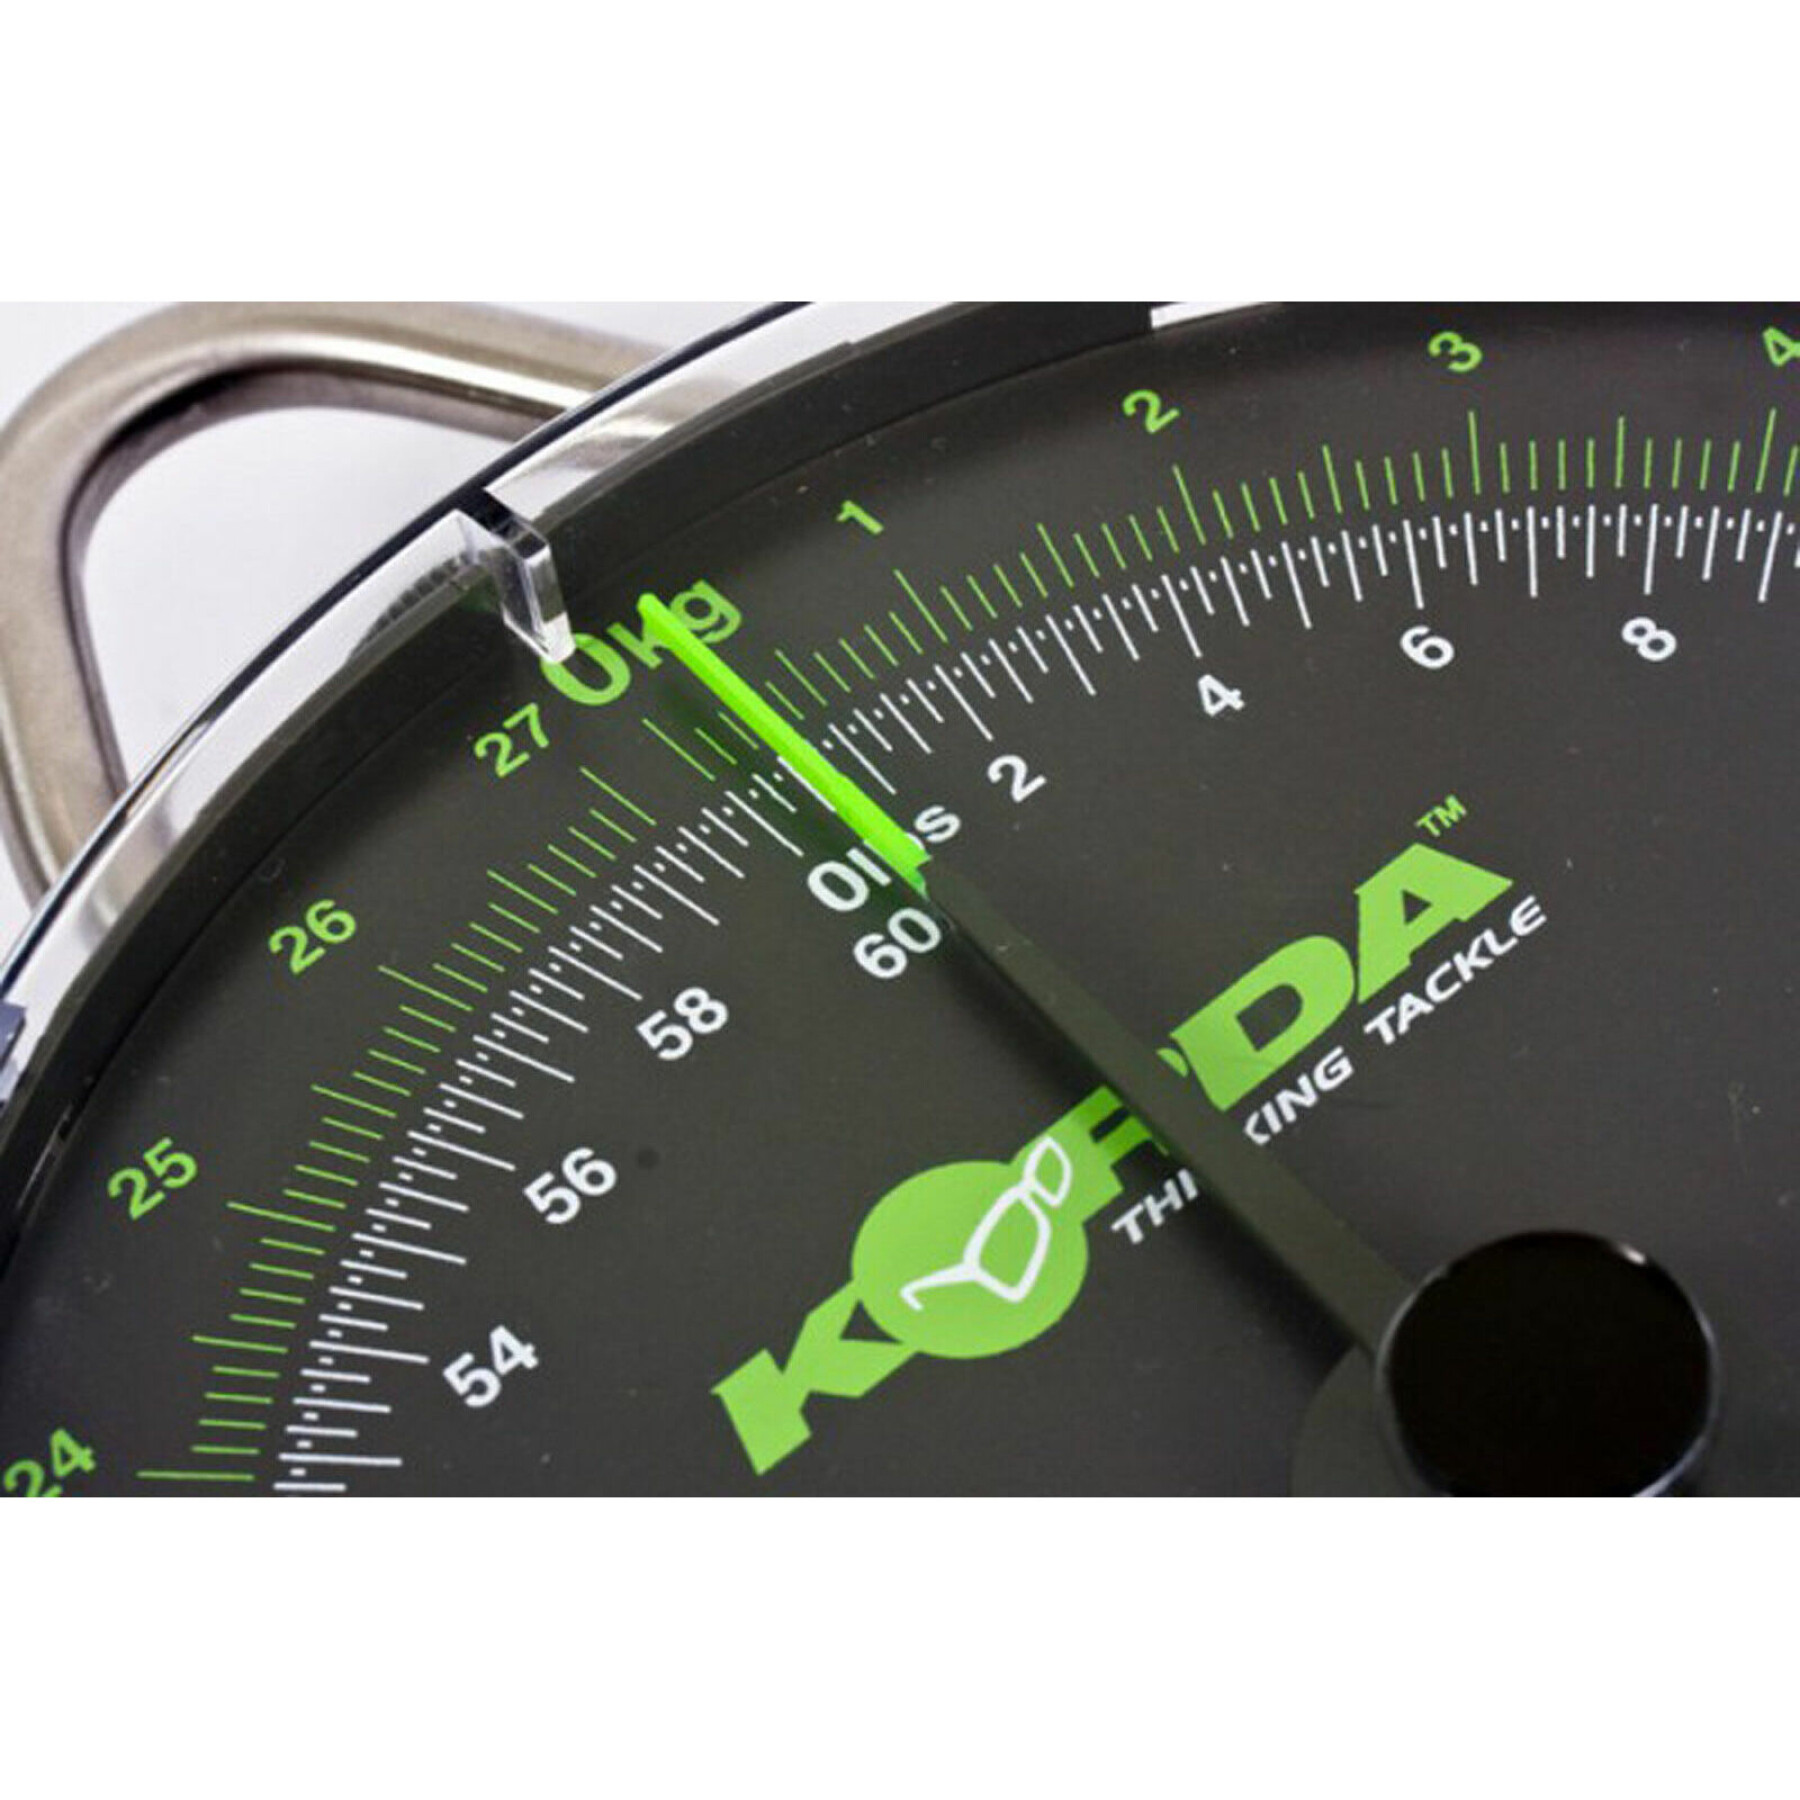 Scale Korda Dial Scale